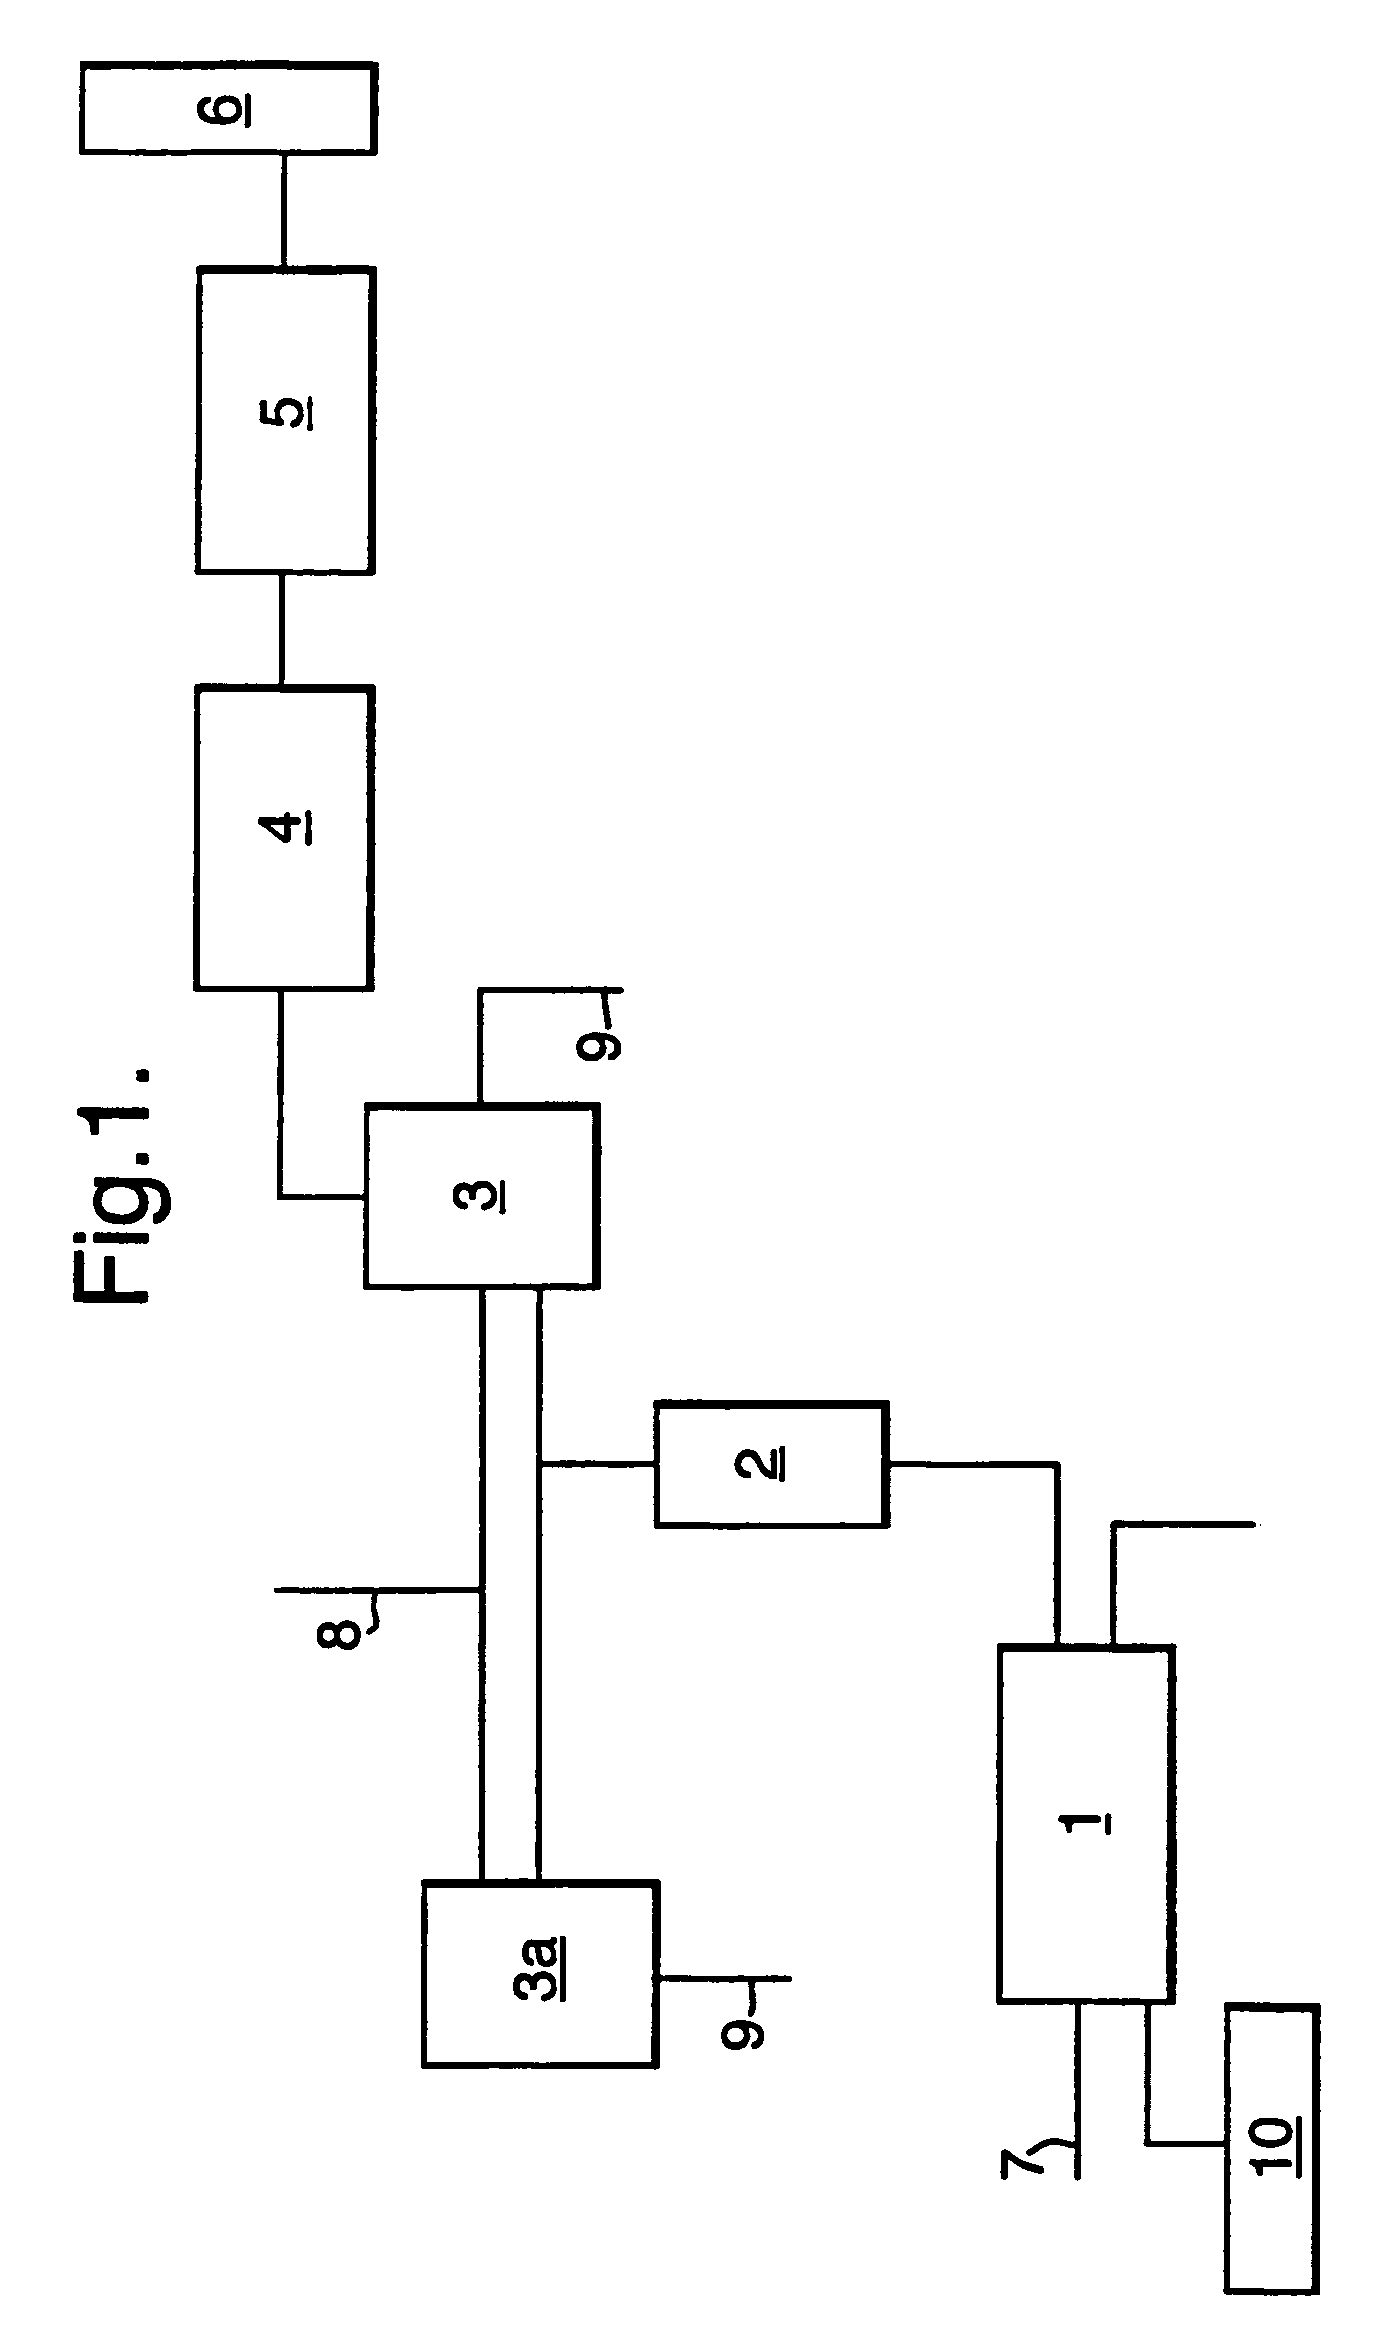 Method and process for co-combustion in a waste to-energy facility